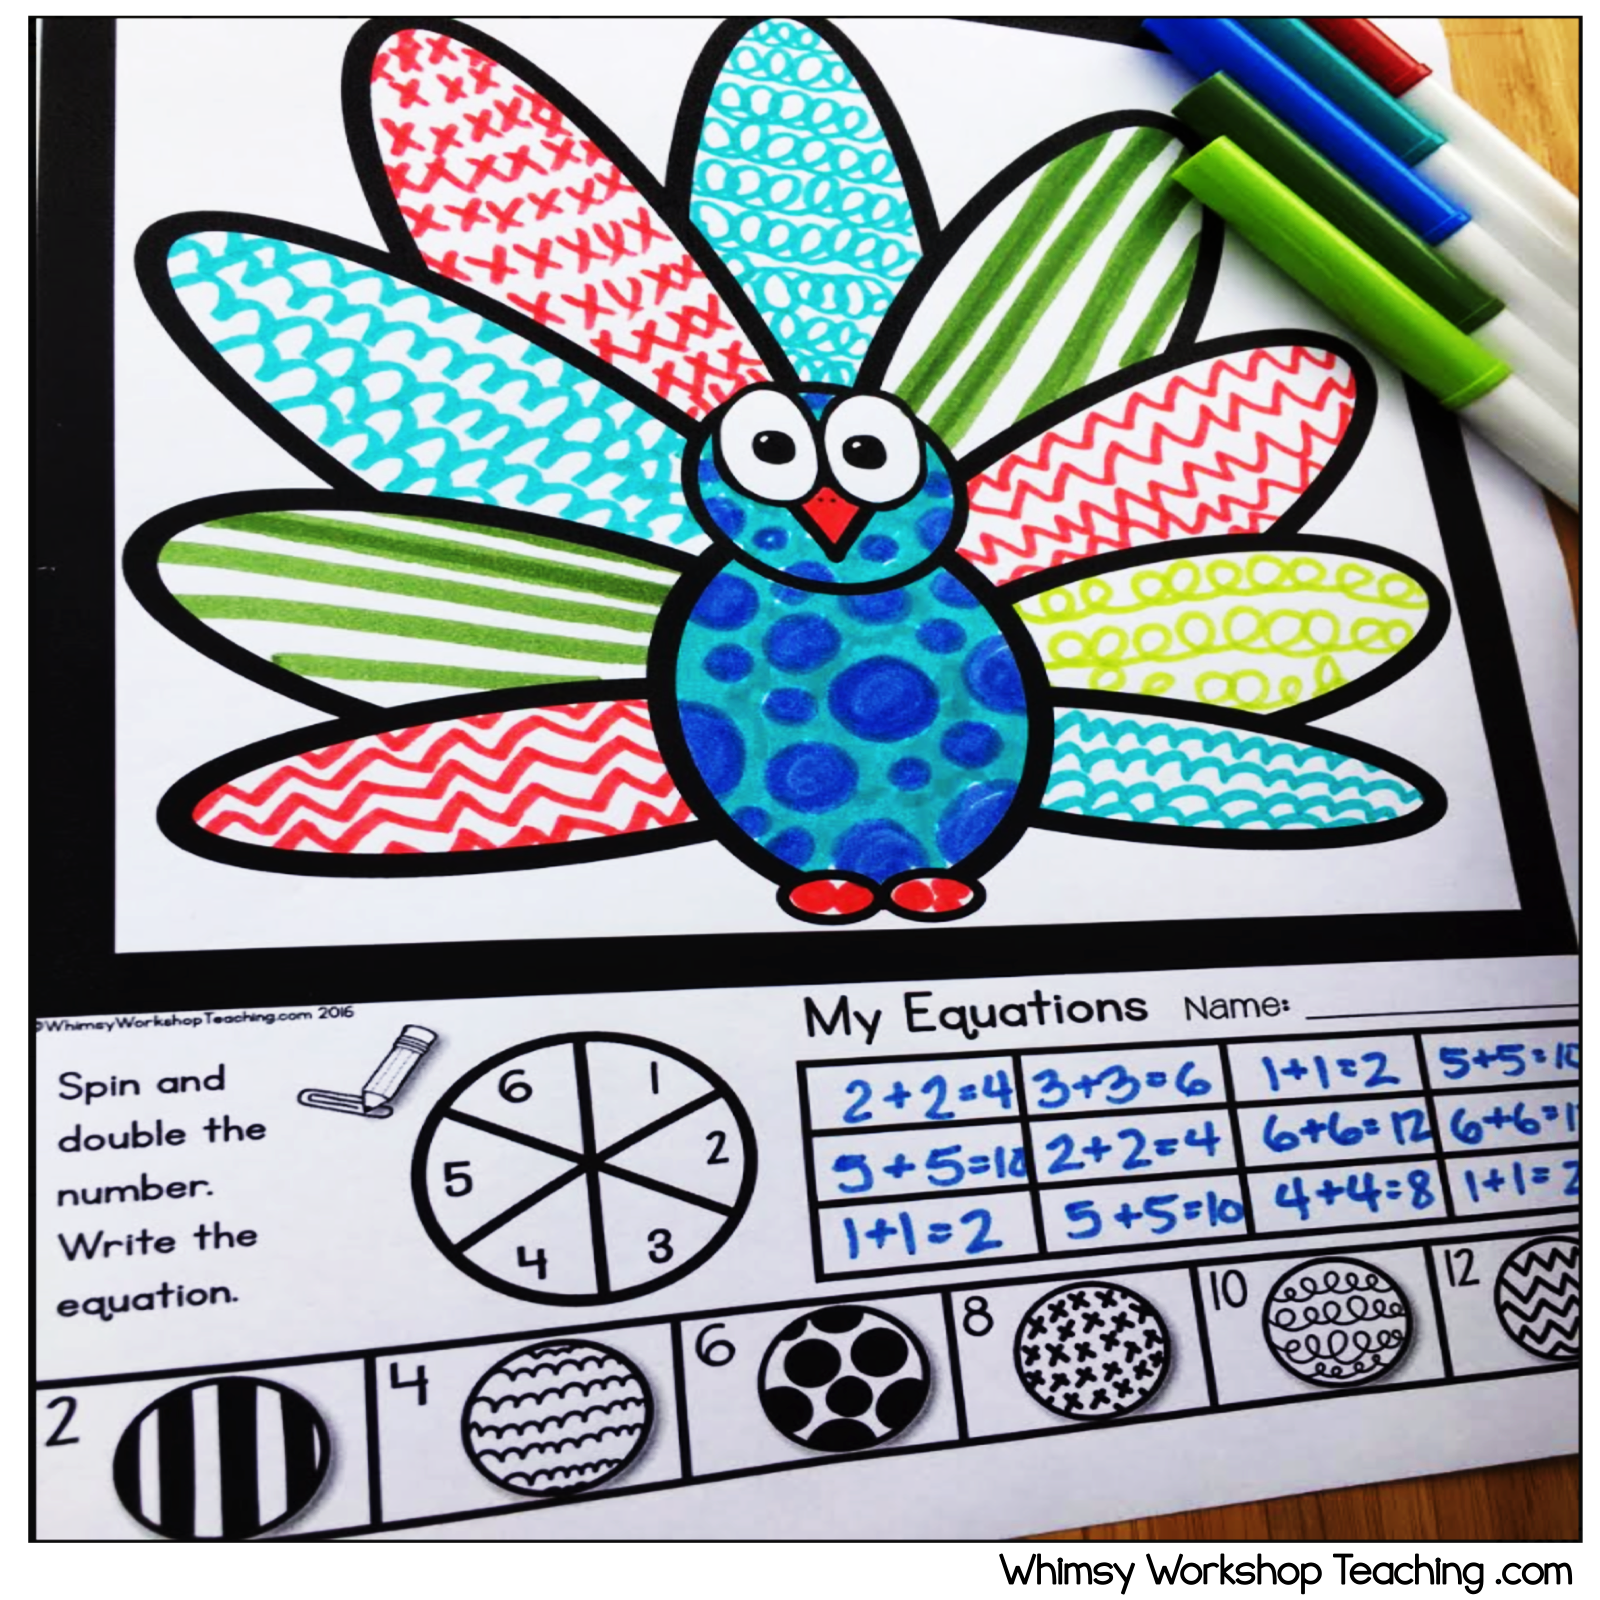 free-math-doodle-whimsy-workshop-teaching